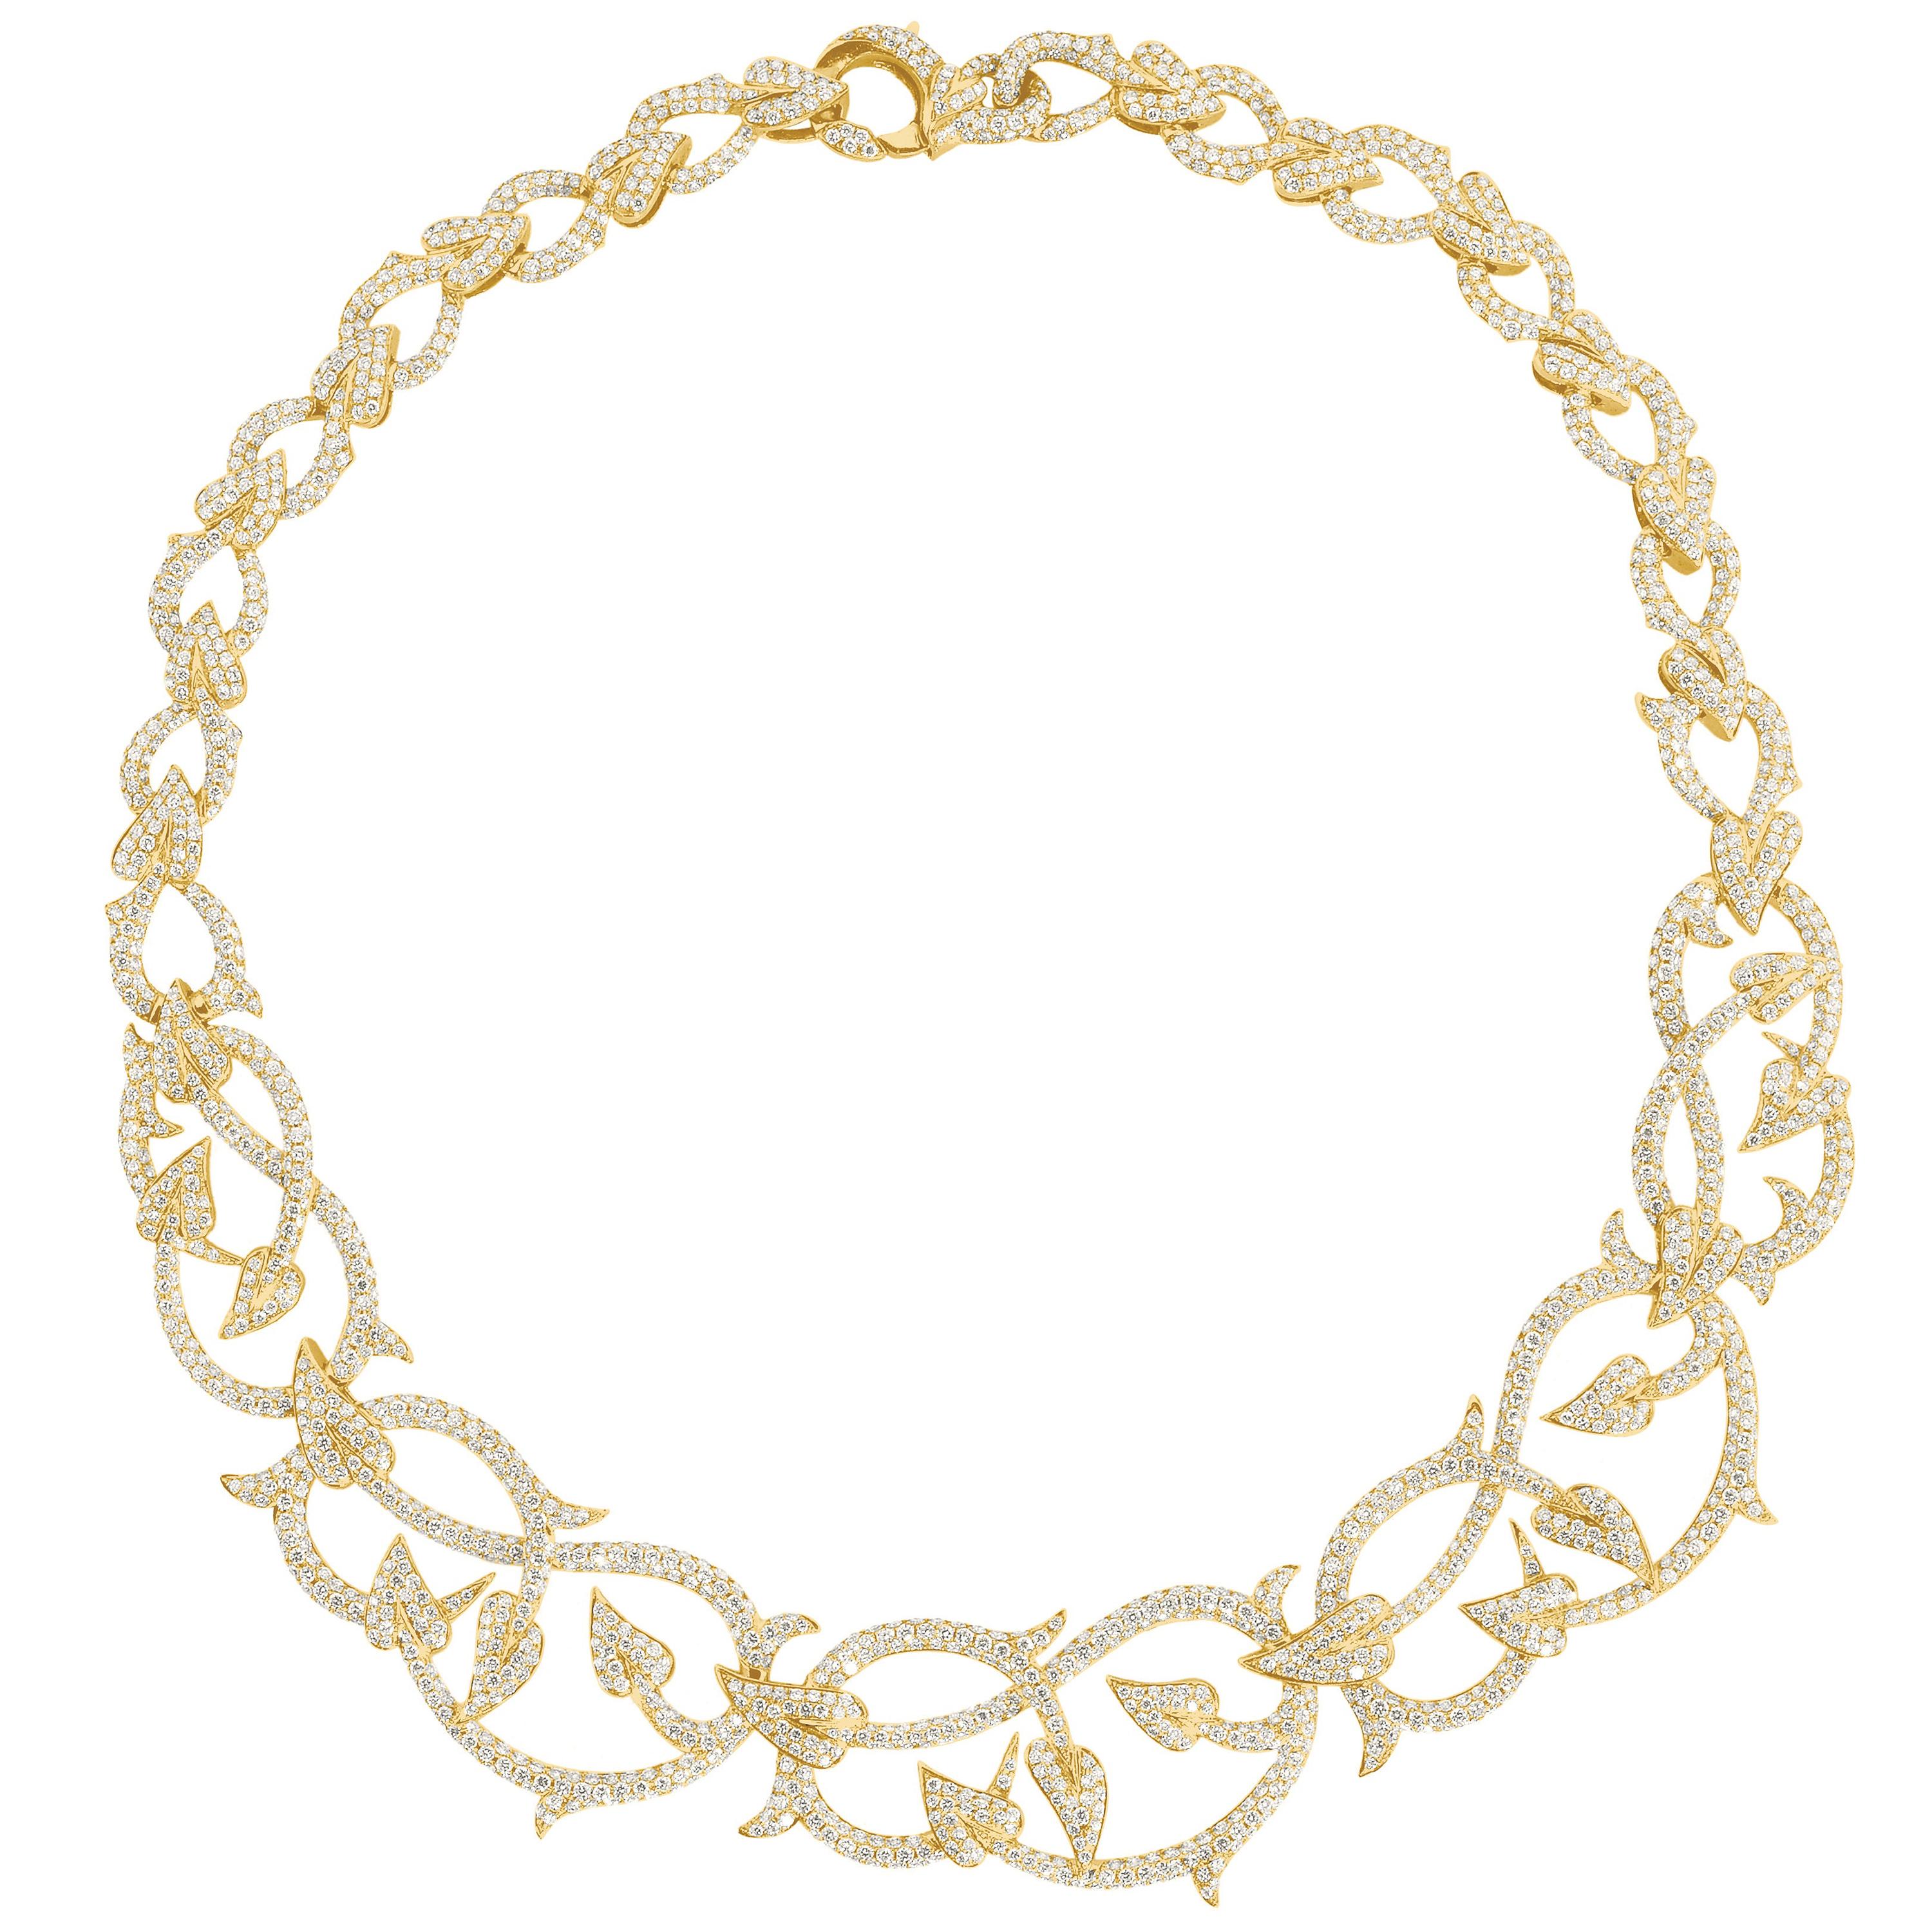 Stephen Webster White Diamond and 18 Carat Yellow Gold Poison Ivy Collar